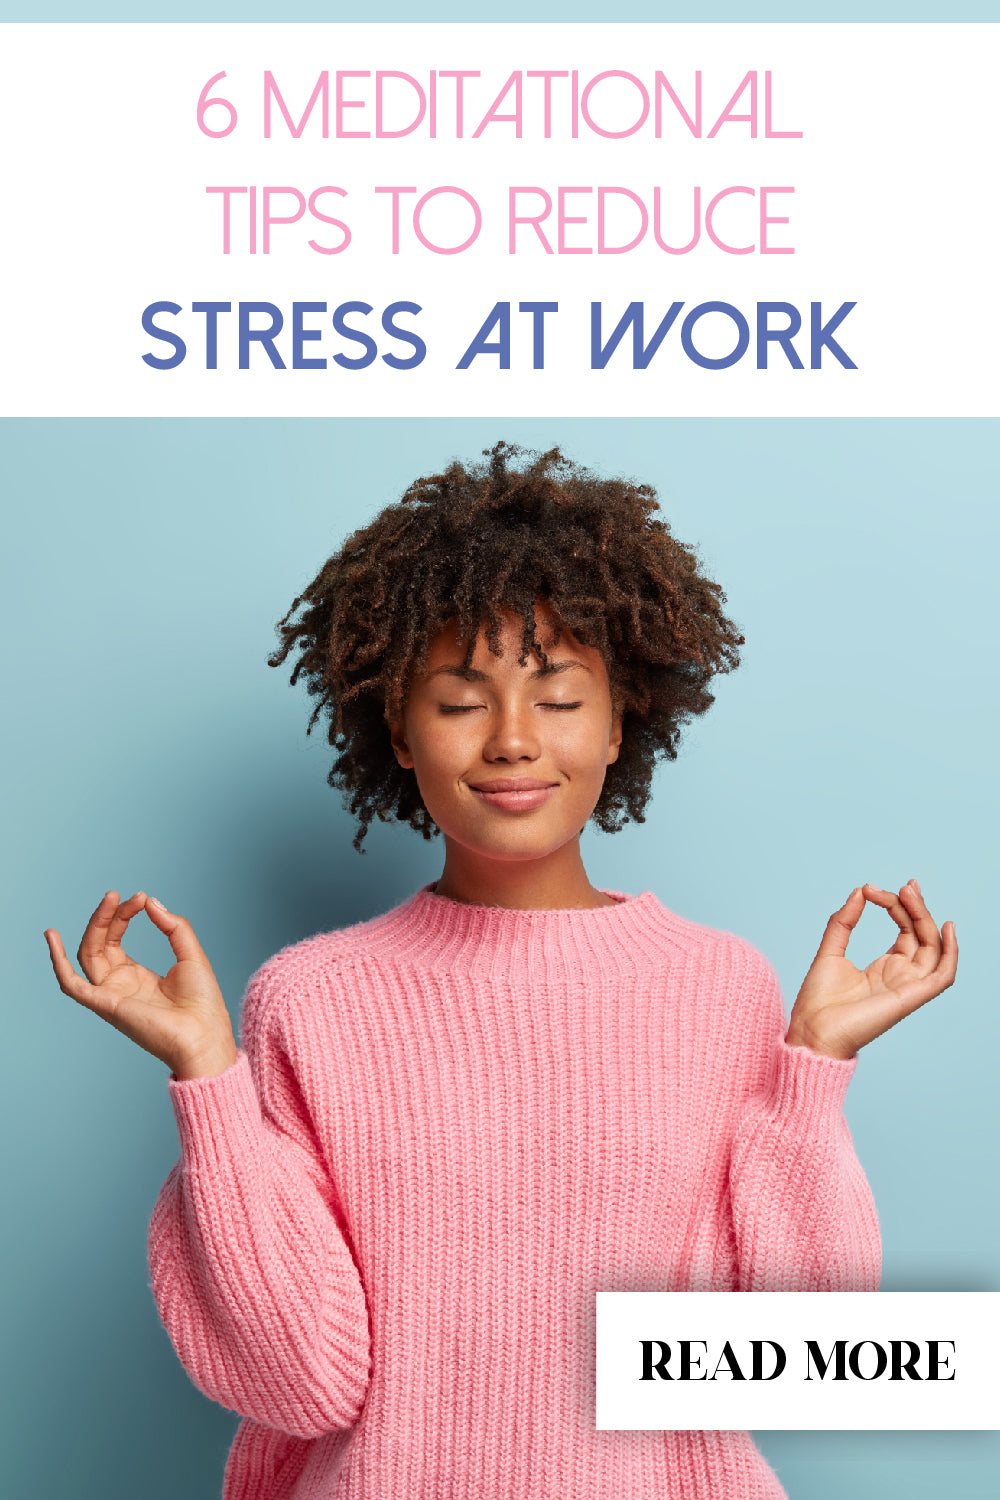 6 Meditational Tips to Reduce Stress at Work